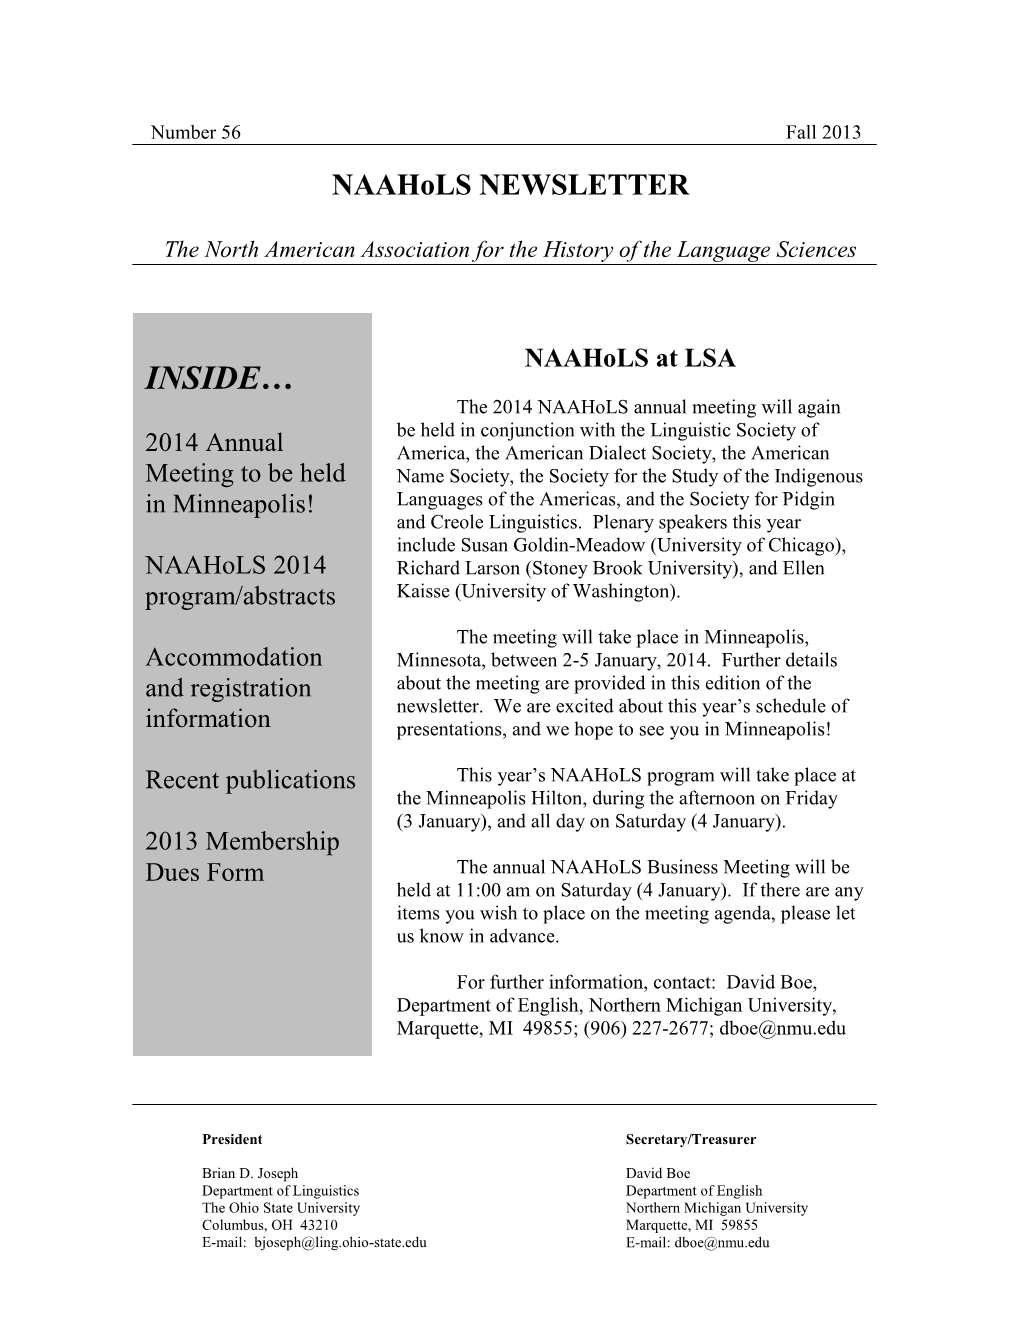 Naahols Newsletter 56 (Fall 2013)